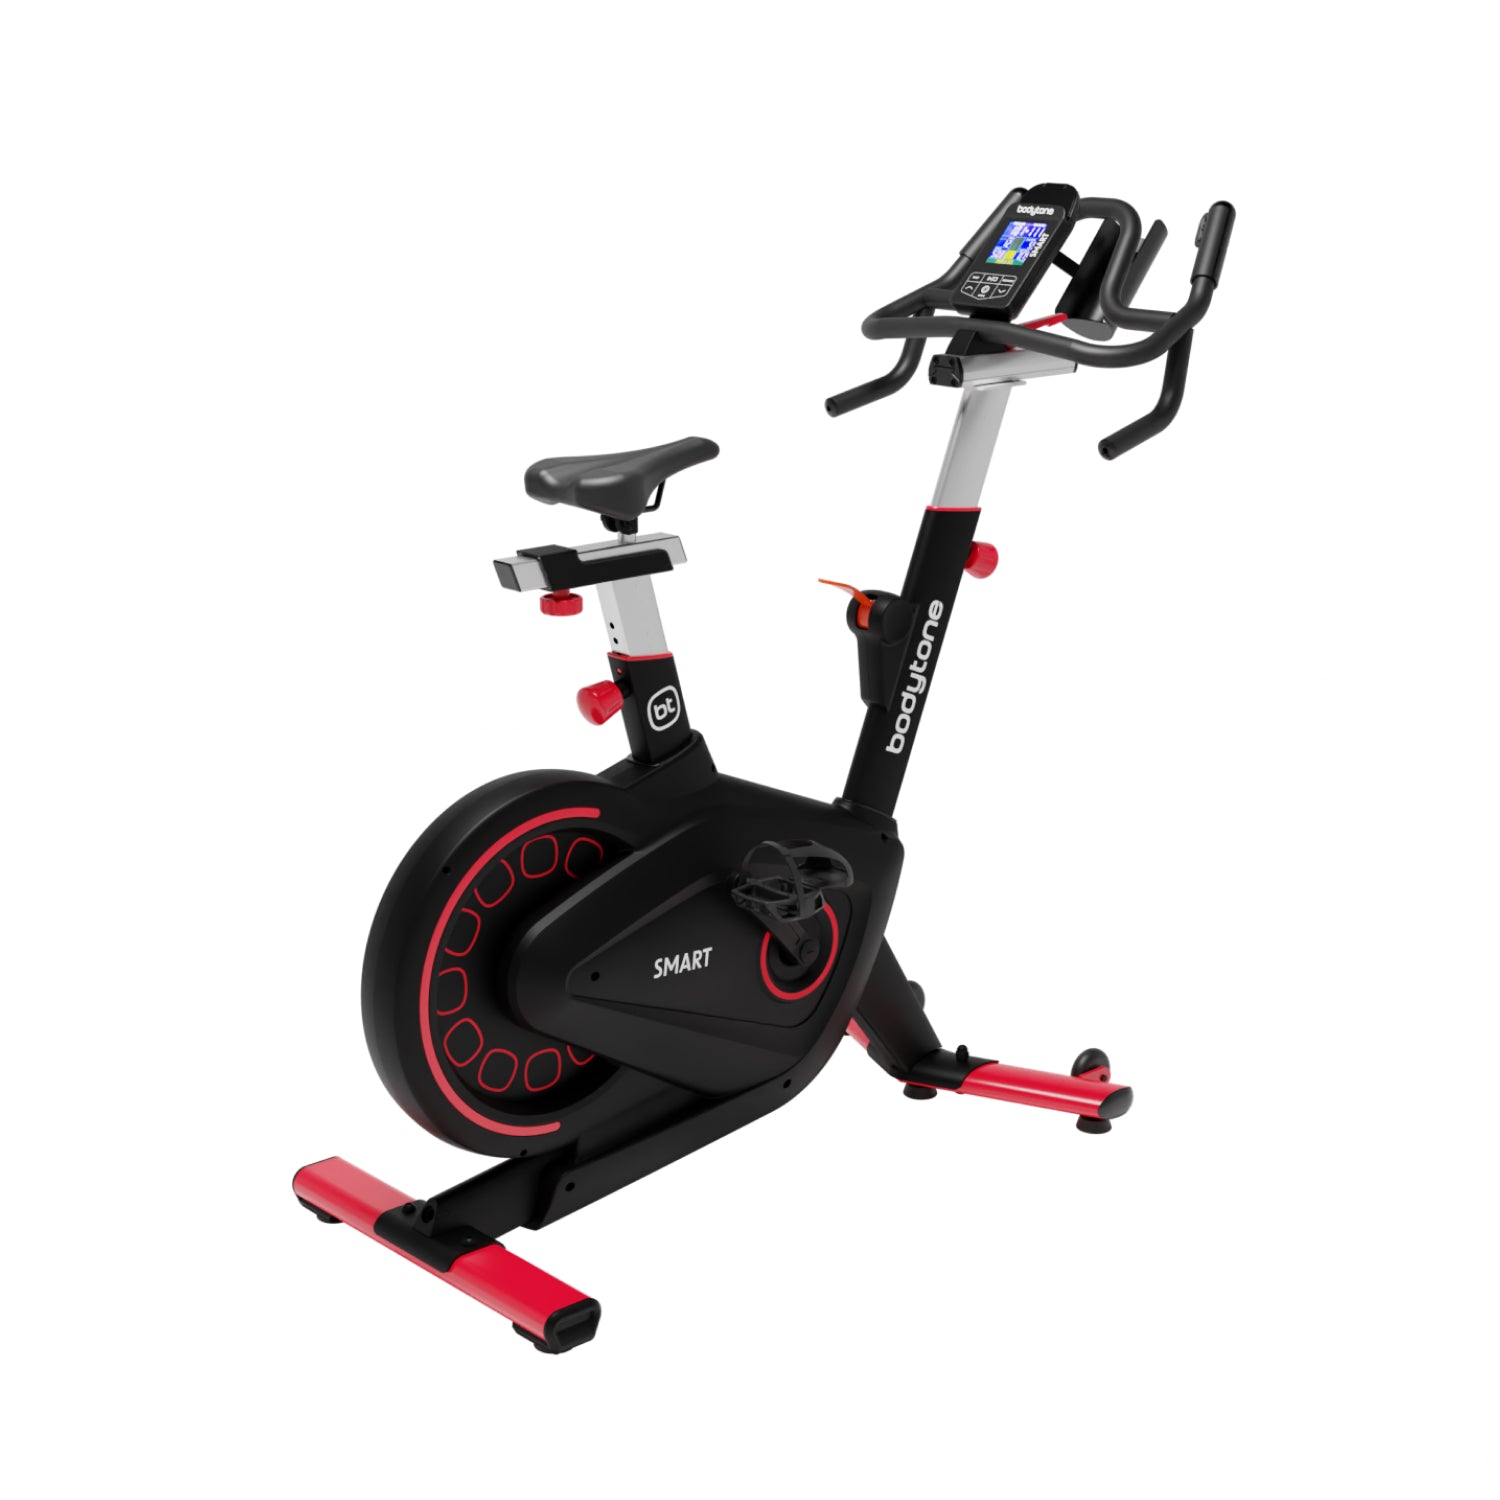 Spinning bikes or indoor cycle - Sportech fitness